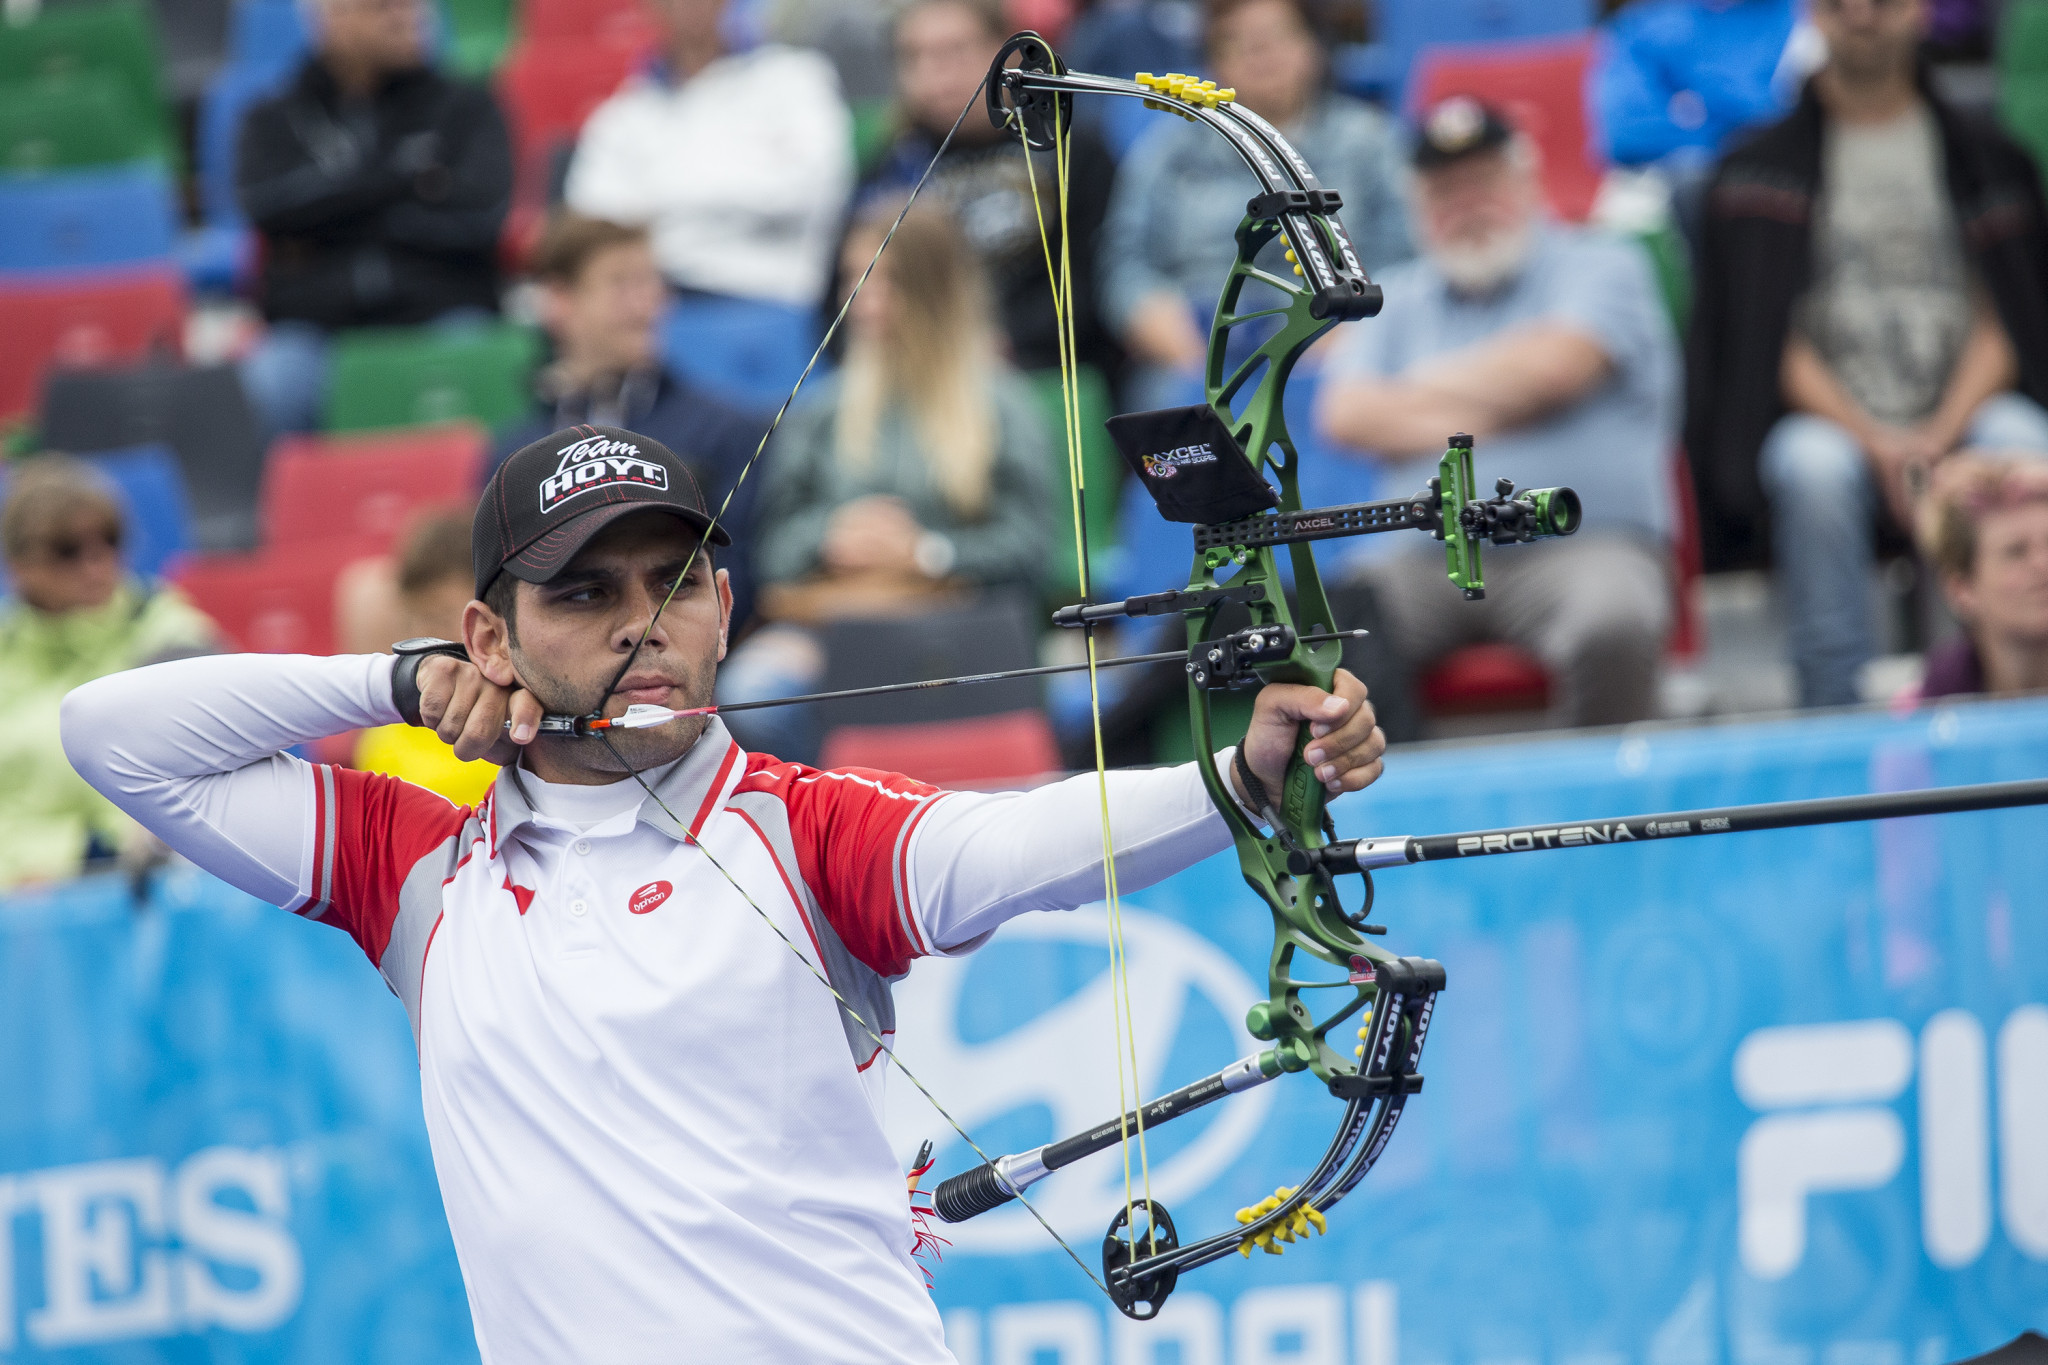 Demir Elmaagacli won the Archery World Cup title in 2015 ©Getty Images